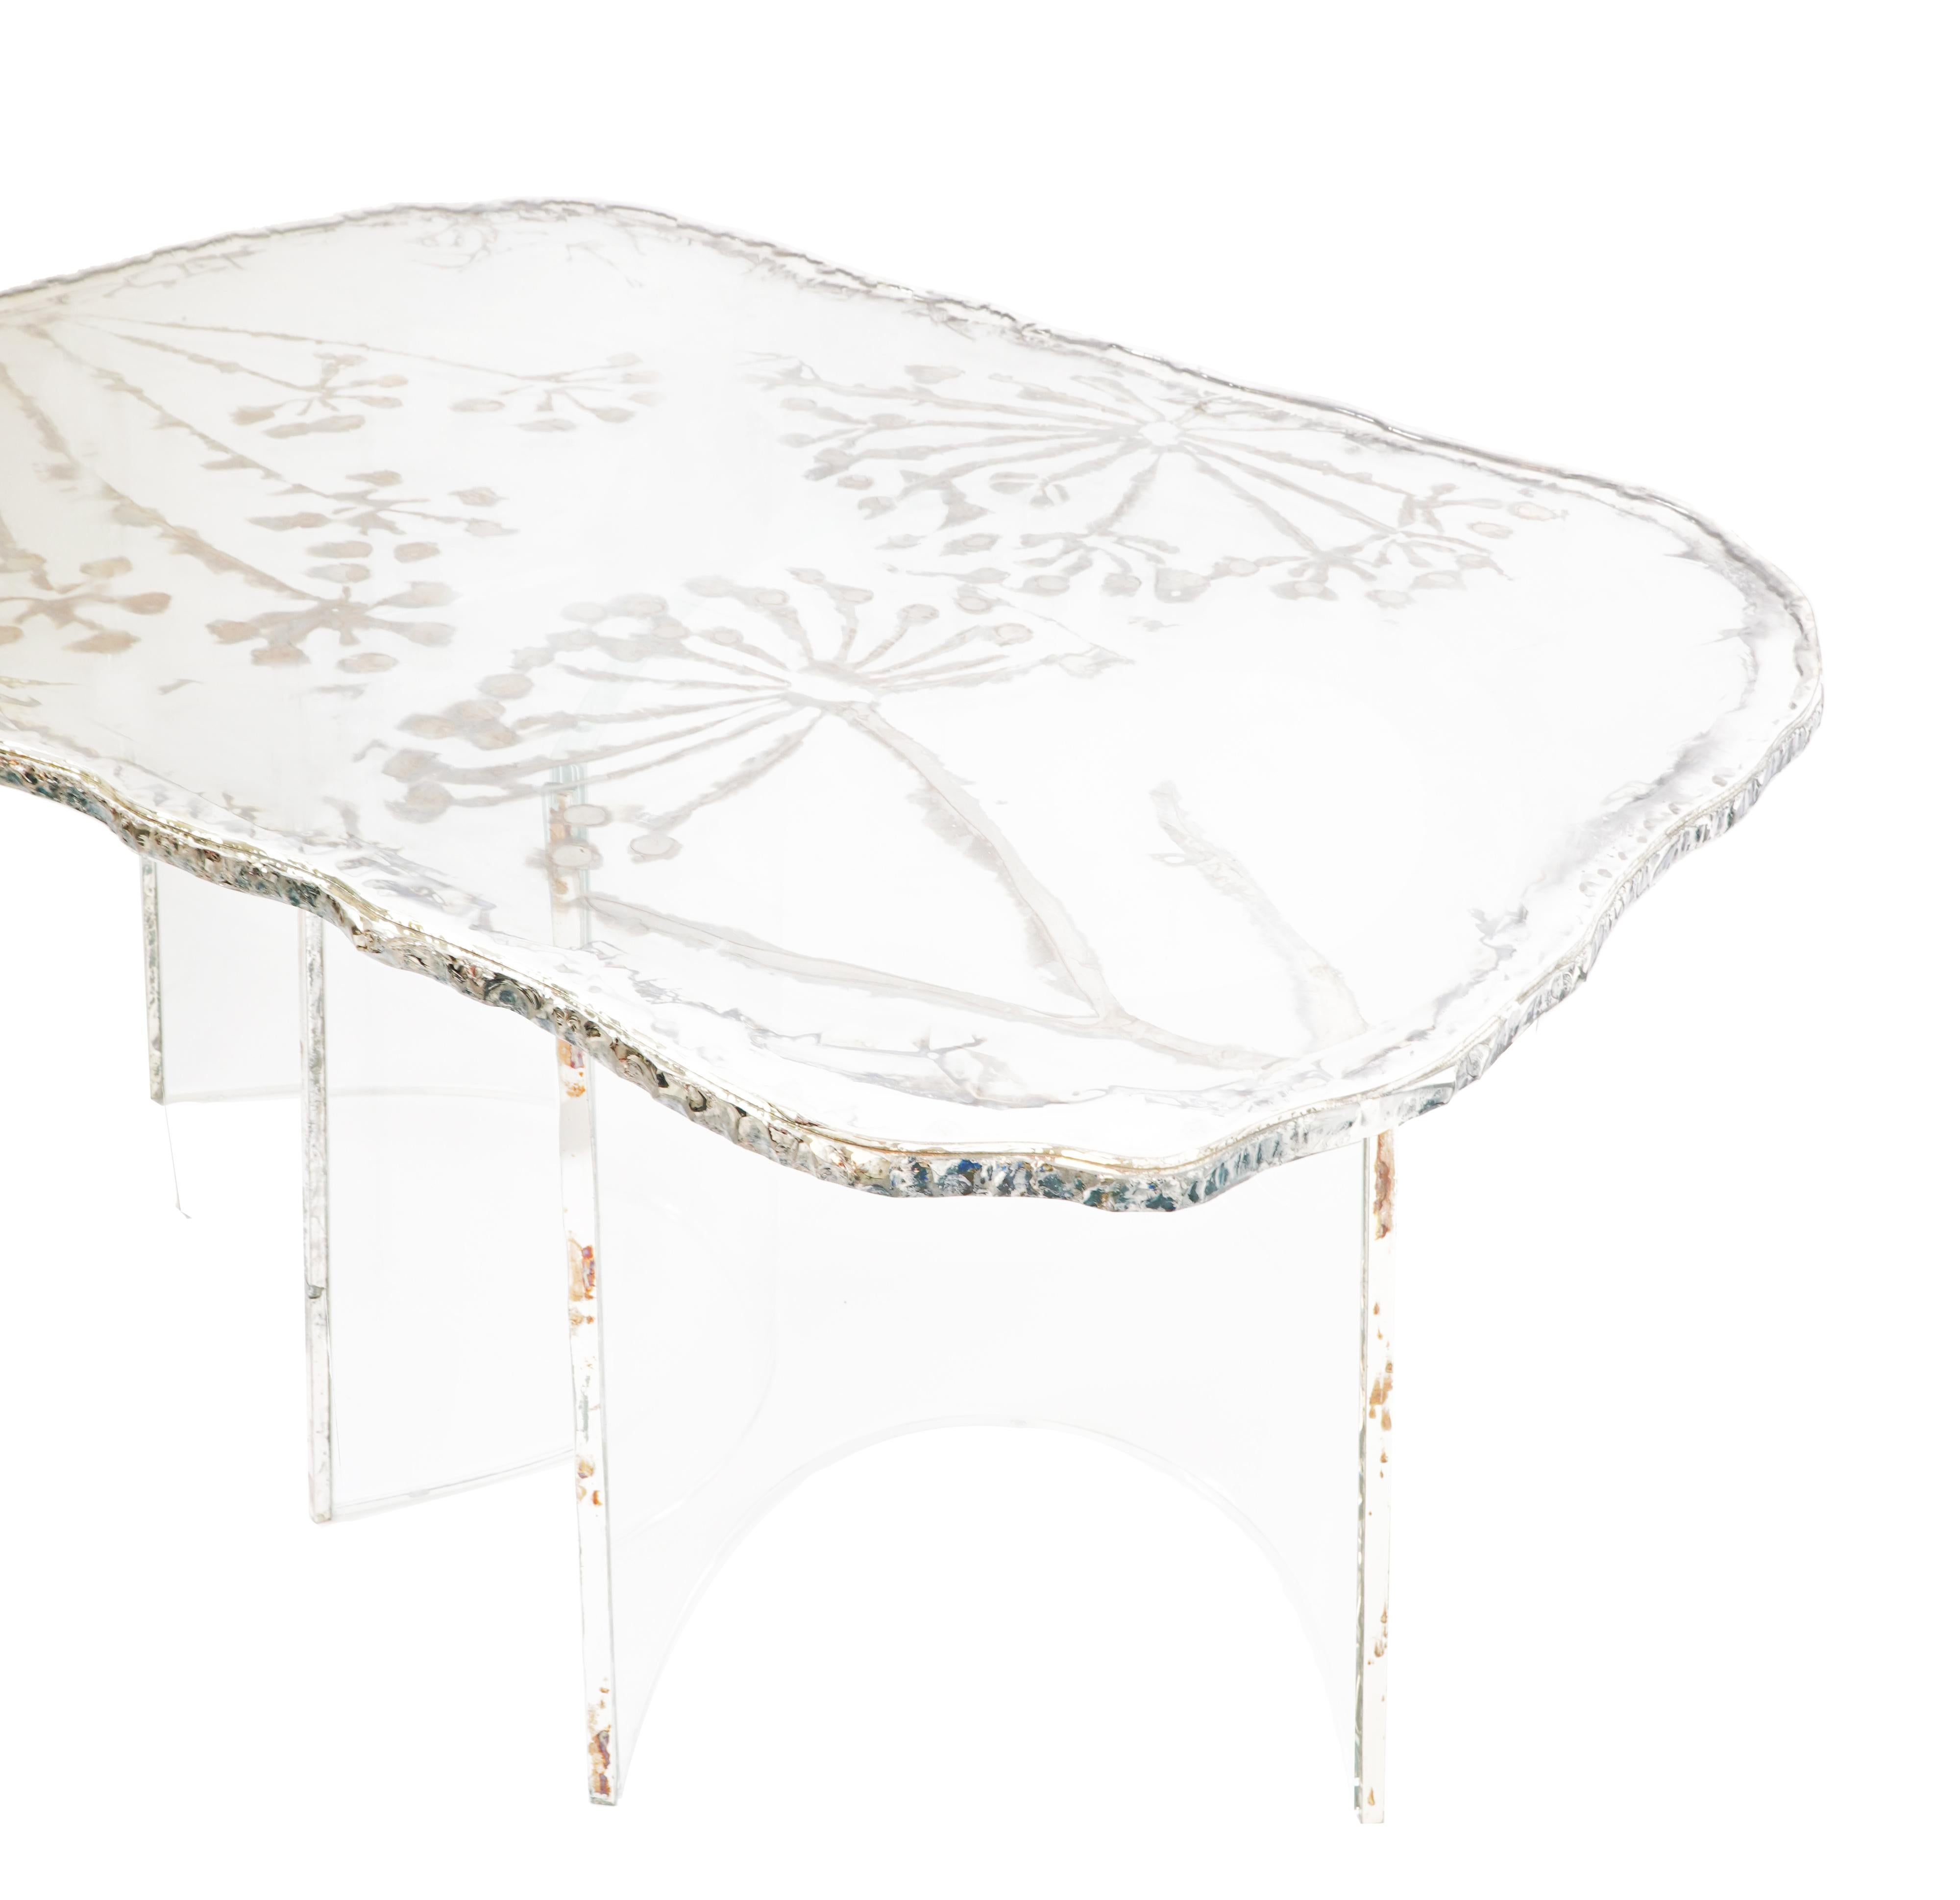 FLOWER  coffee - dining - console table

Enhance your elegance and radiate brilliance with our collection of silver tables. Exquisite pieces that add a touch of shimmer and glamor to your home interior.

The table, reminiscent of a gem hugged by its